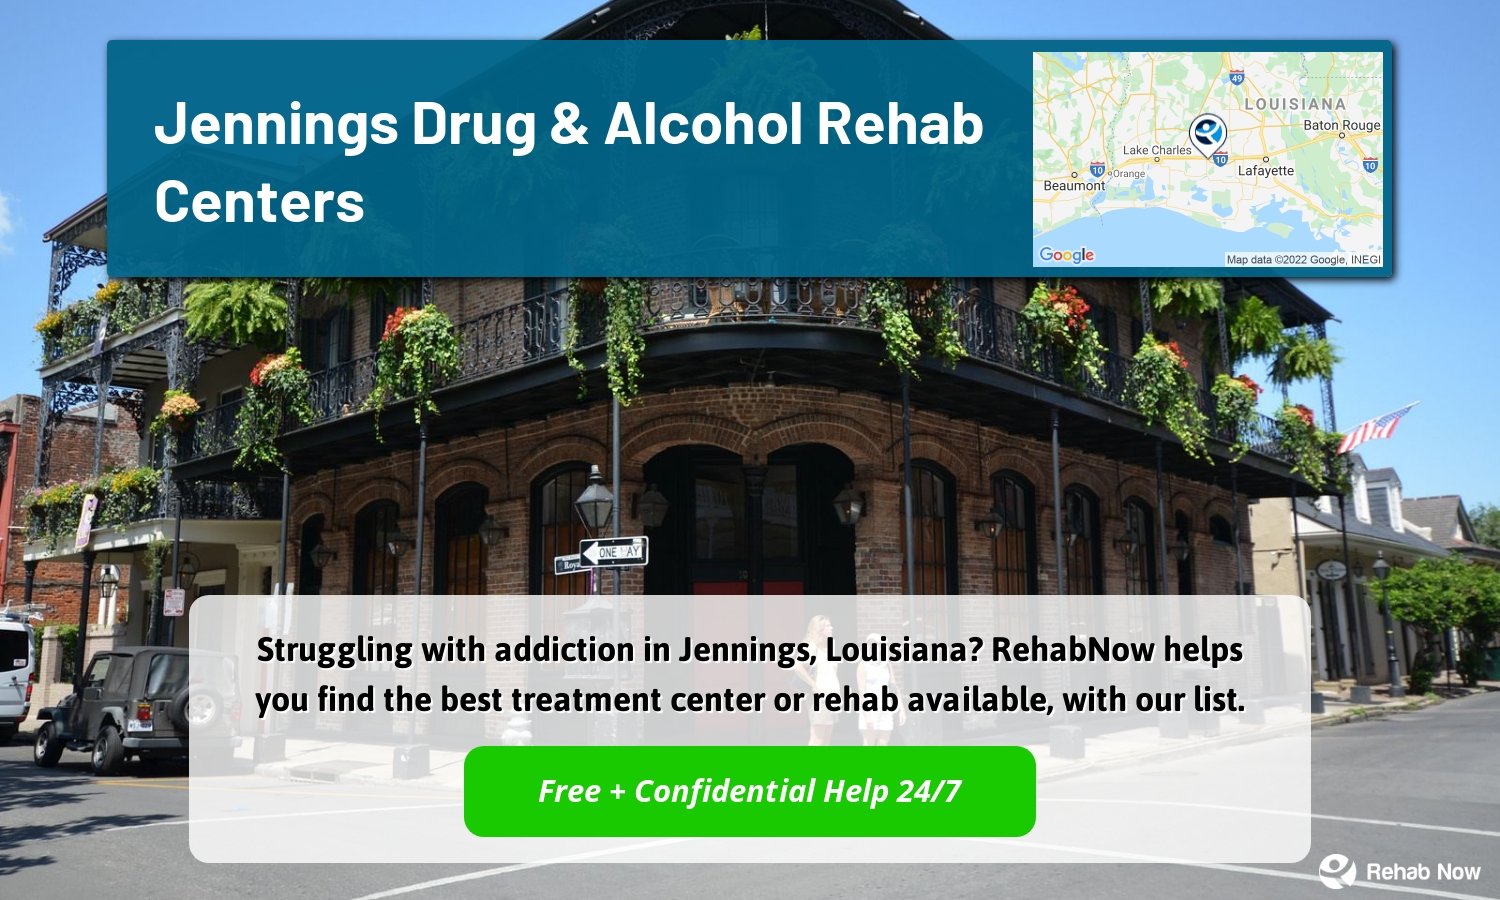 Struggling with addiction in Jennings, Louisiana? RehabNow helps you find the best treatment center or rehab available, with our list.